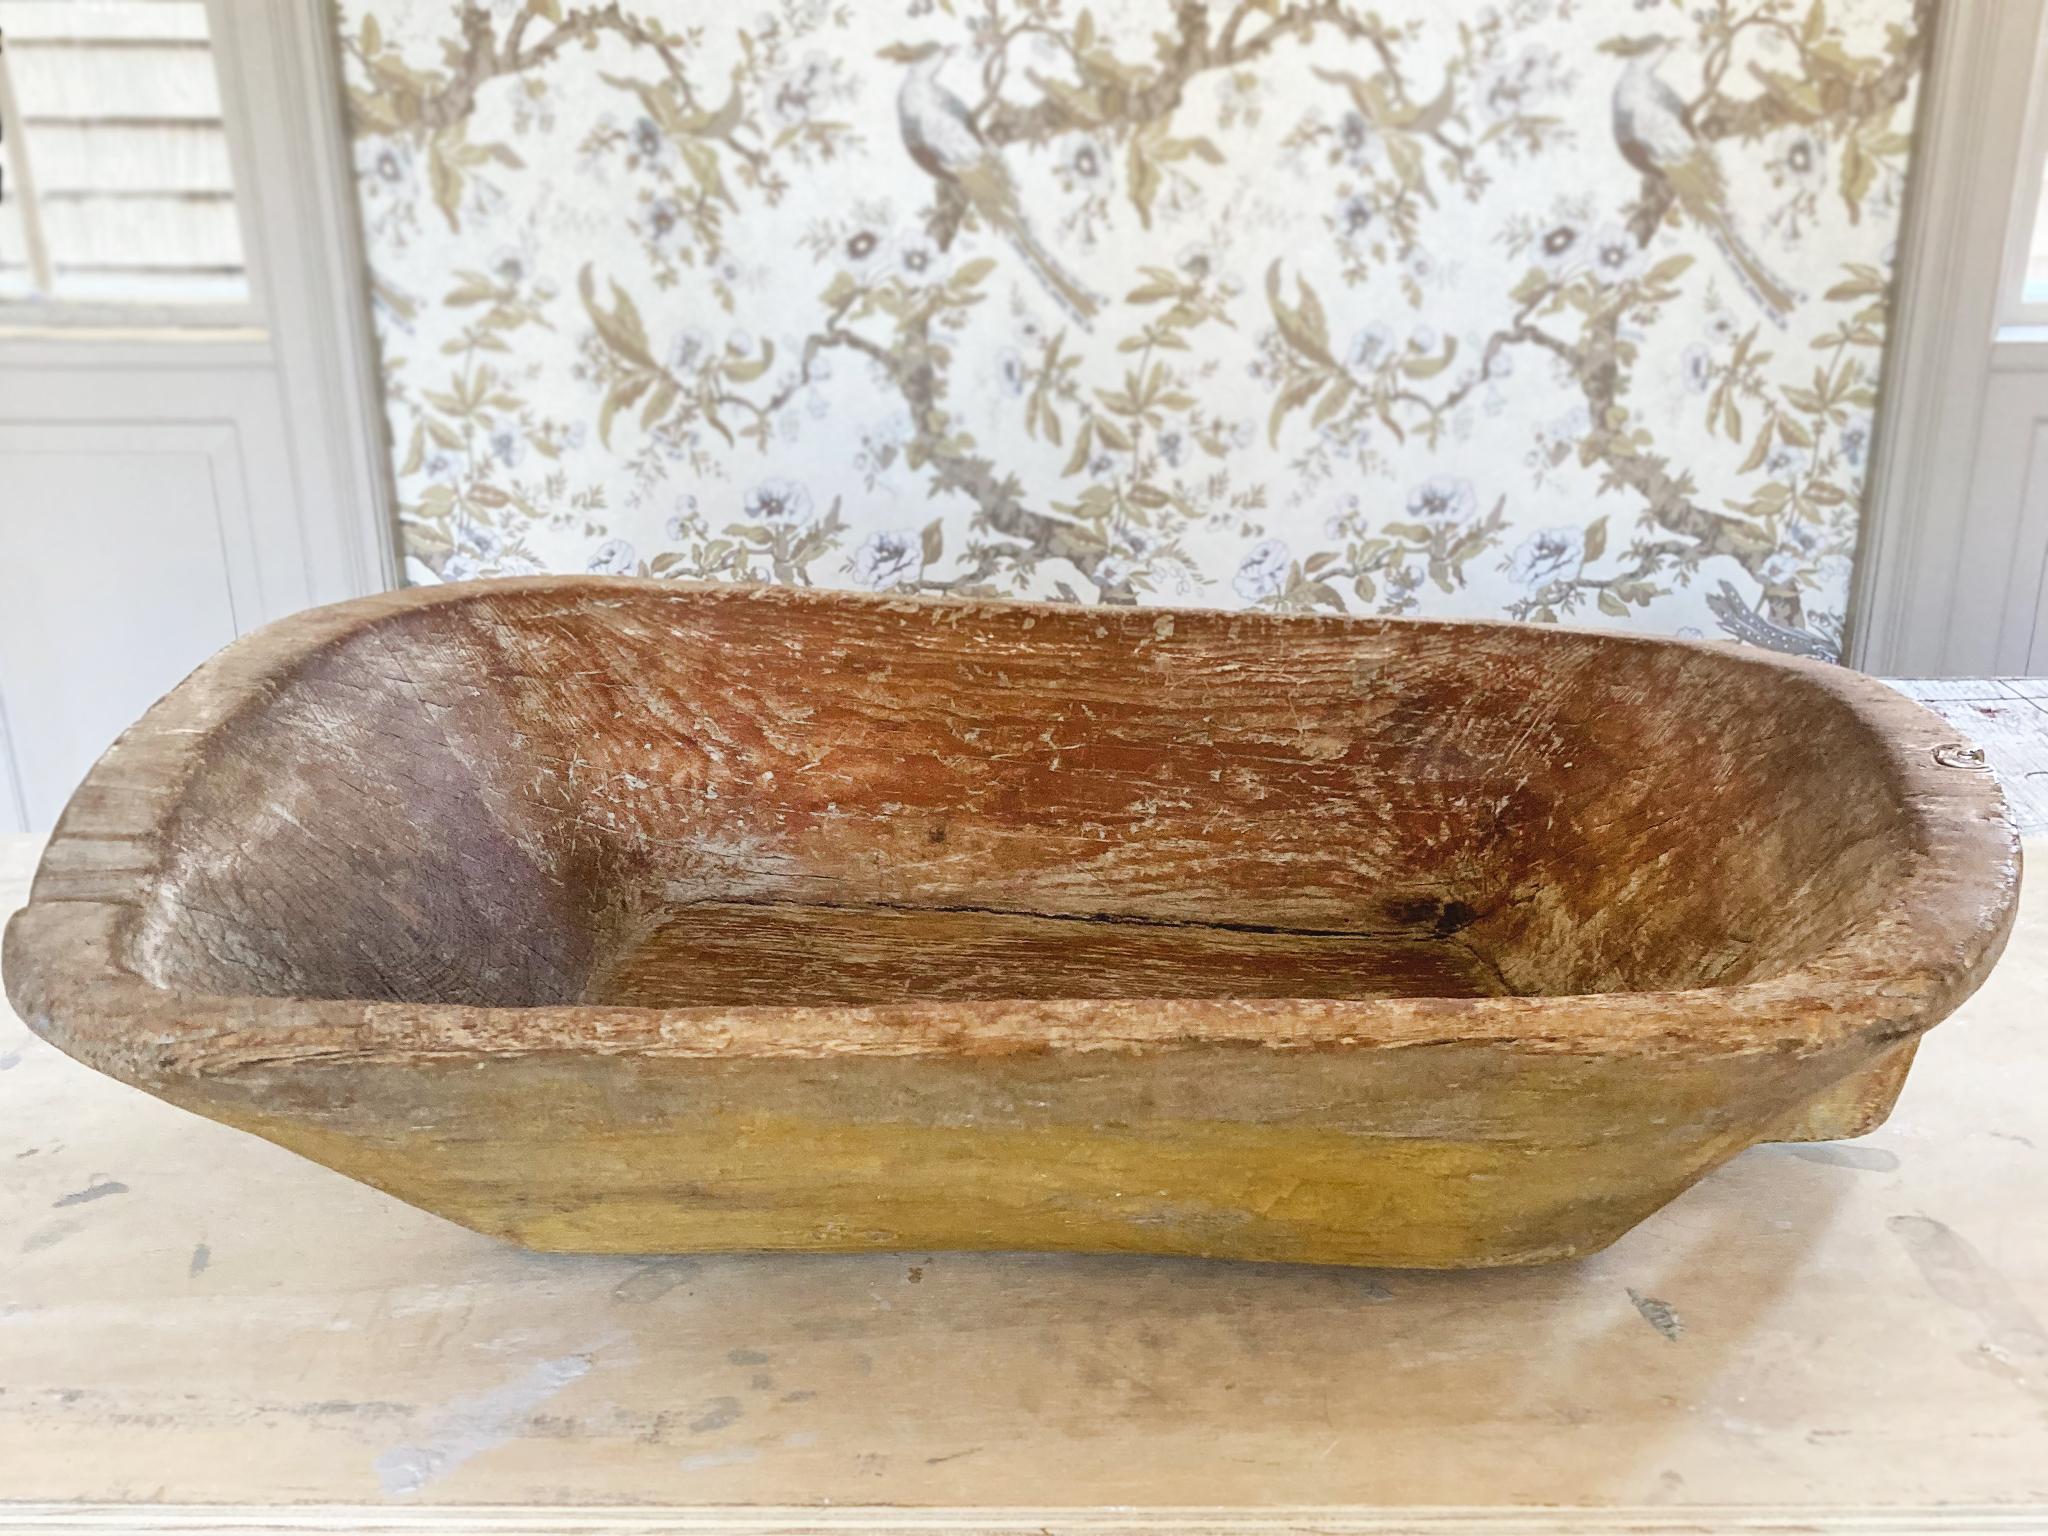 This large wooden trencher was hand-made in the 19th Century. It has a beautifully aged surface. We love the yellow paint that's been smoothed and worn over the years to reveal the rich, hand-carved textures underneath.

Dimensions:
28.5 in.